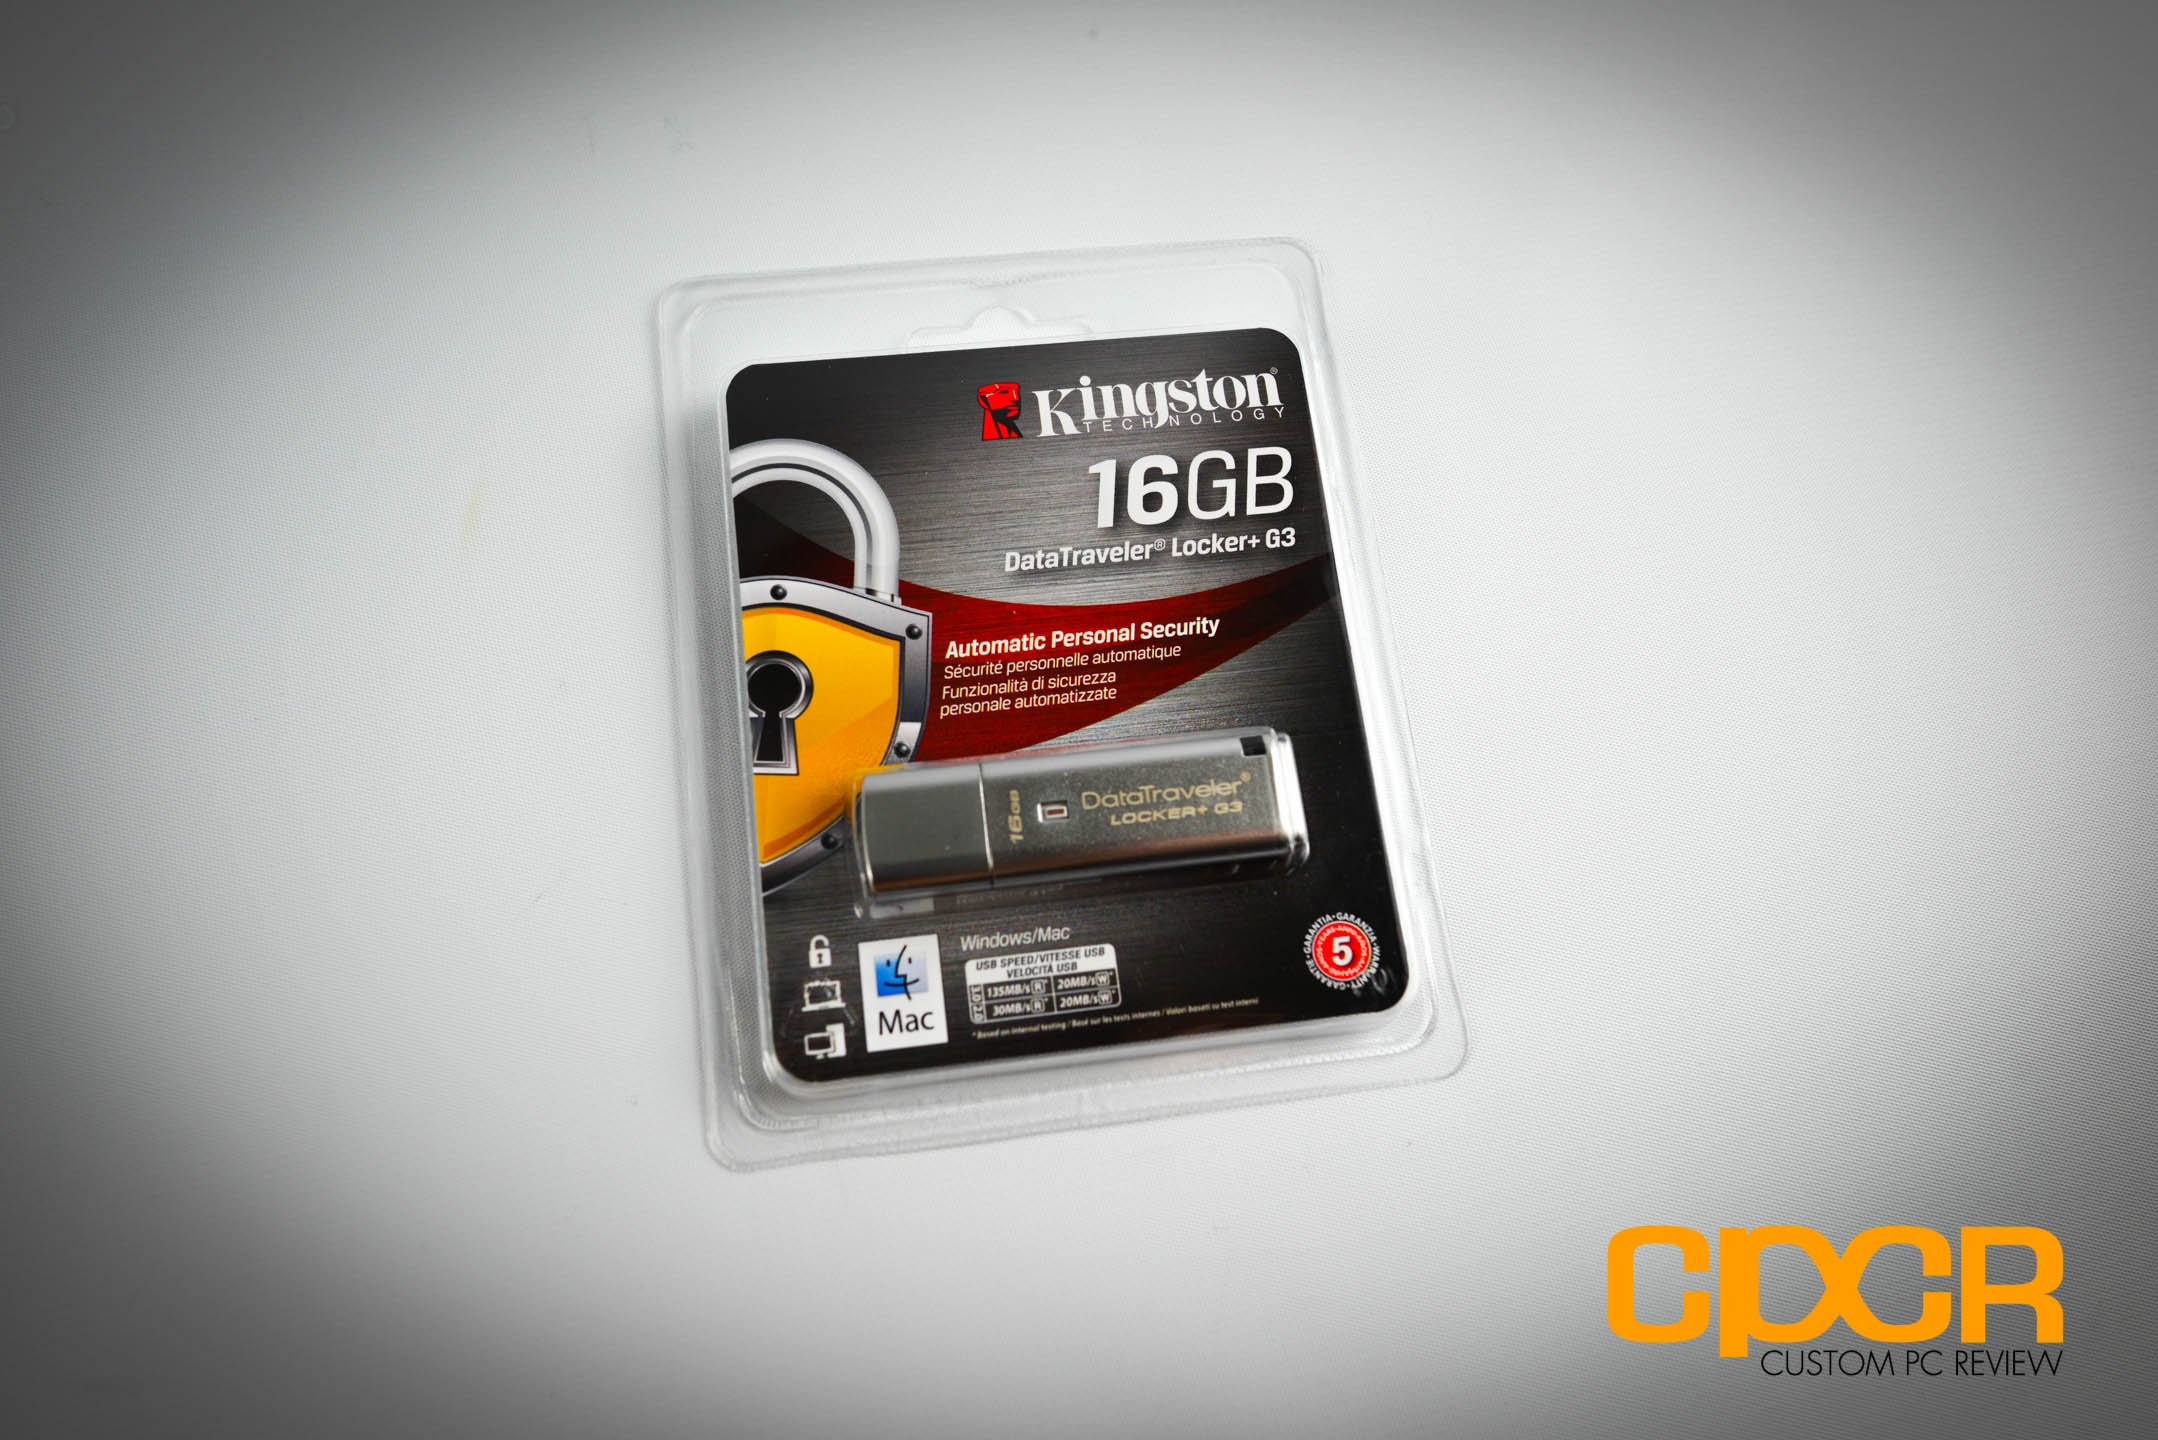 G3 Kingston Digital Traveler Locker 128GB DTLPG3/128GB USB 3.0 with Personal Data Security and Automatic Cloud Backup